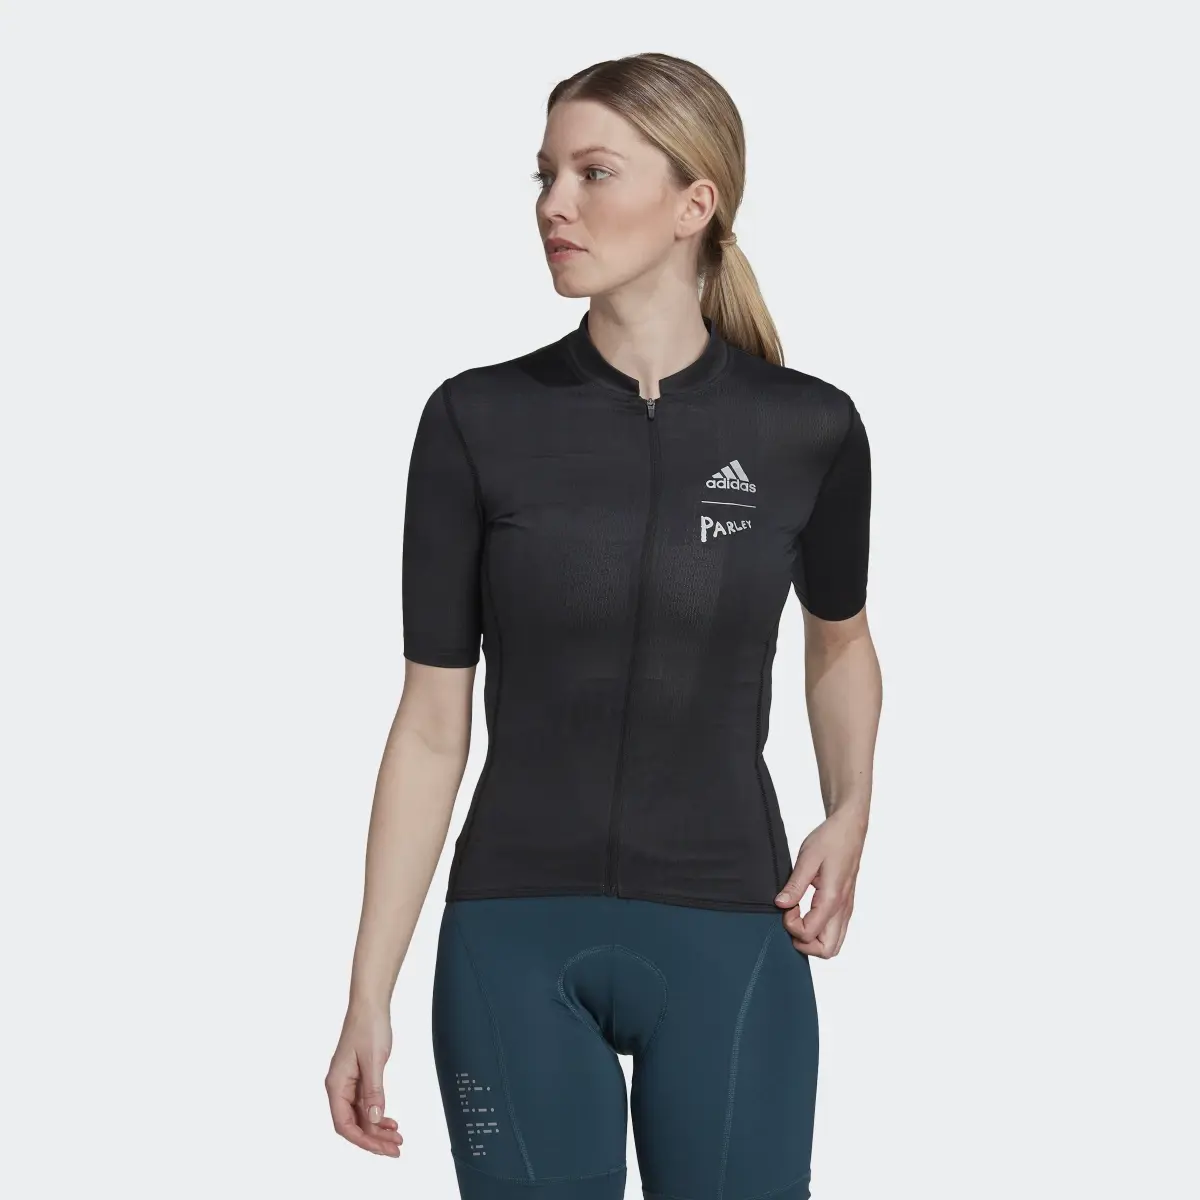 Adidas The Parley Short Sleeve Cycling Jersey. 2